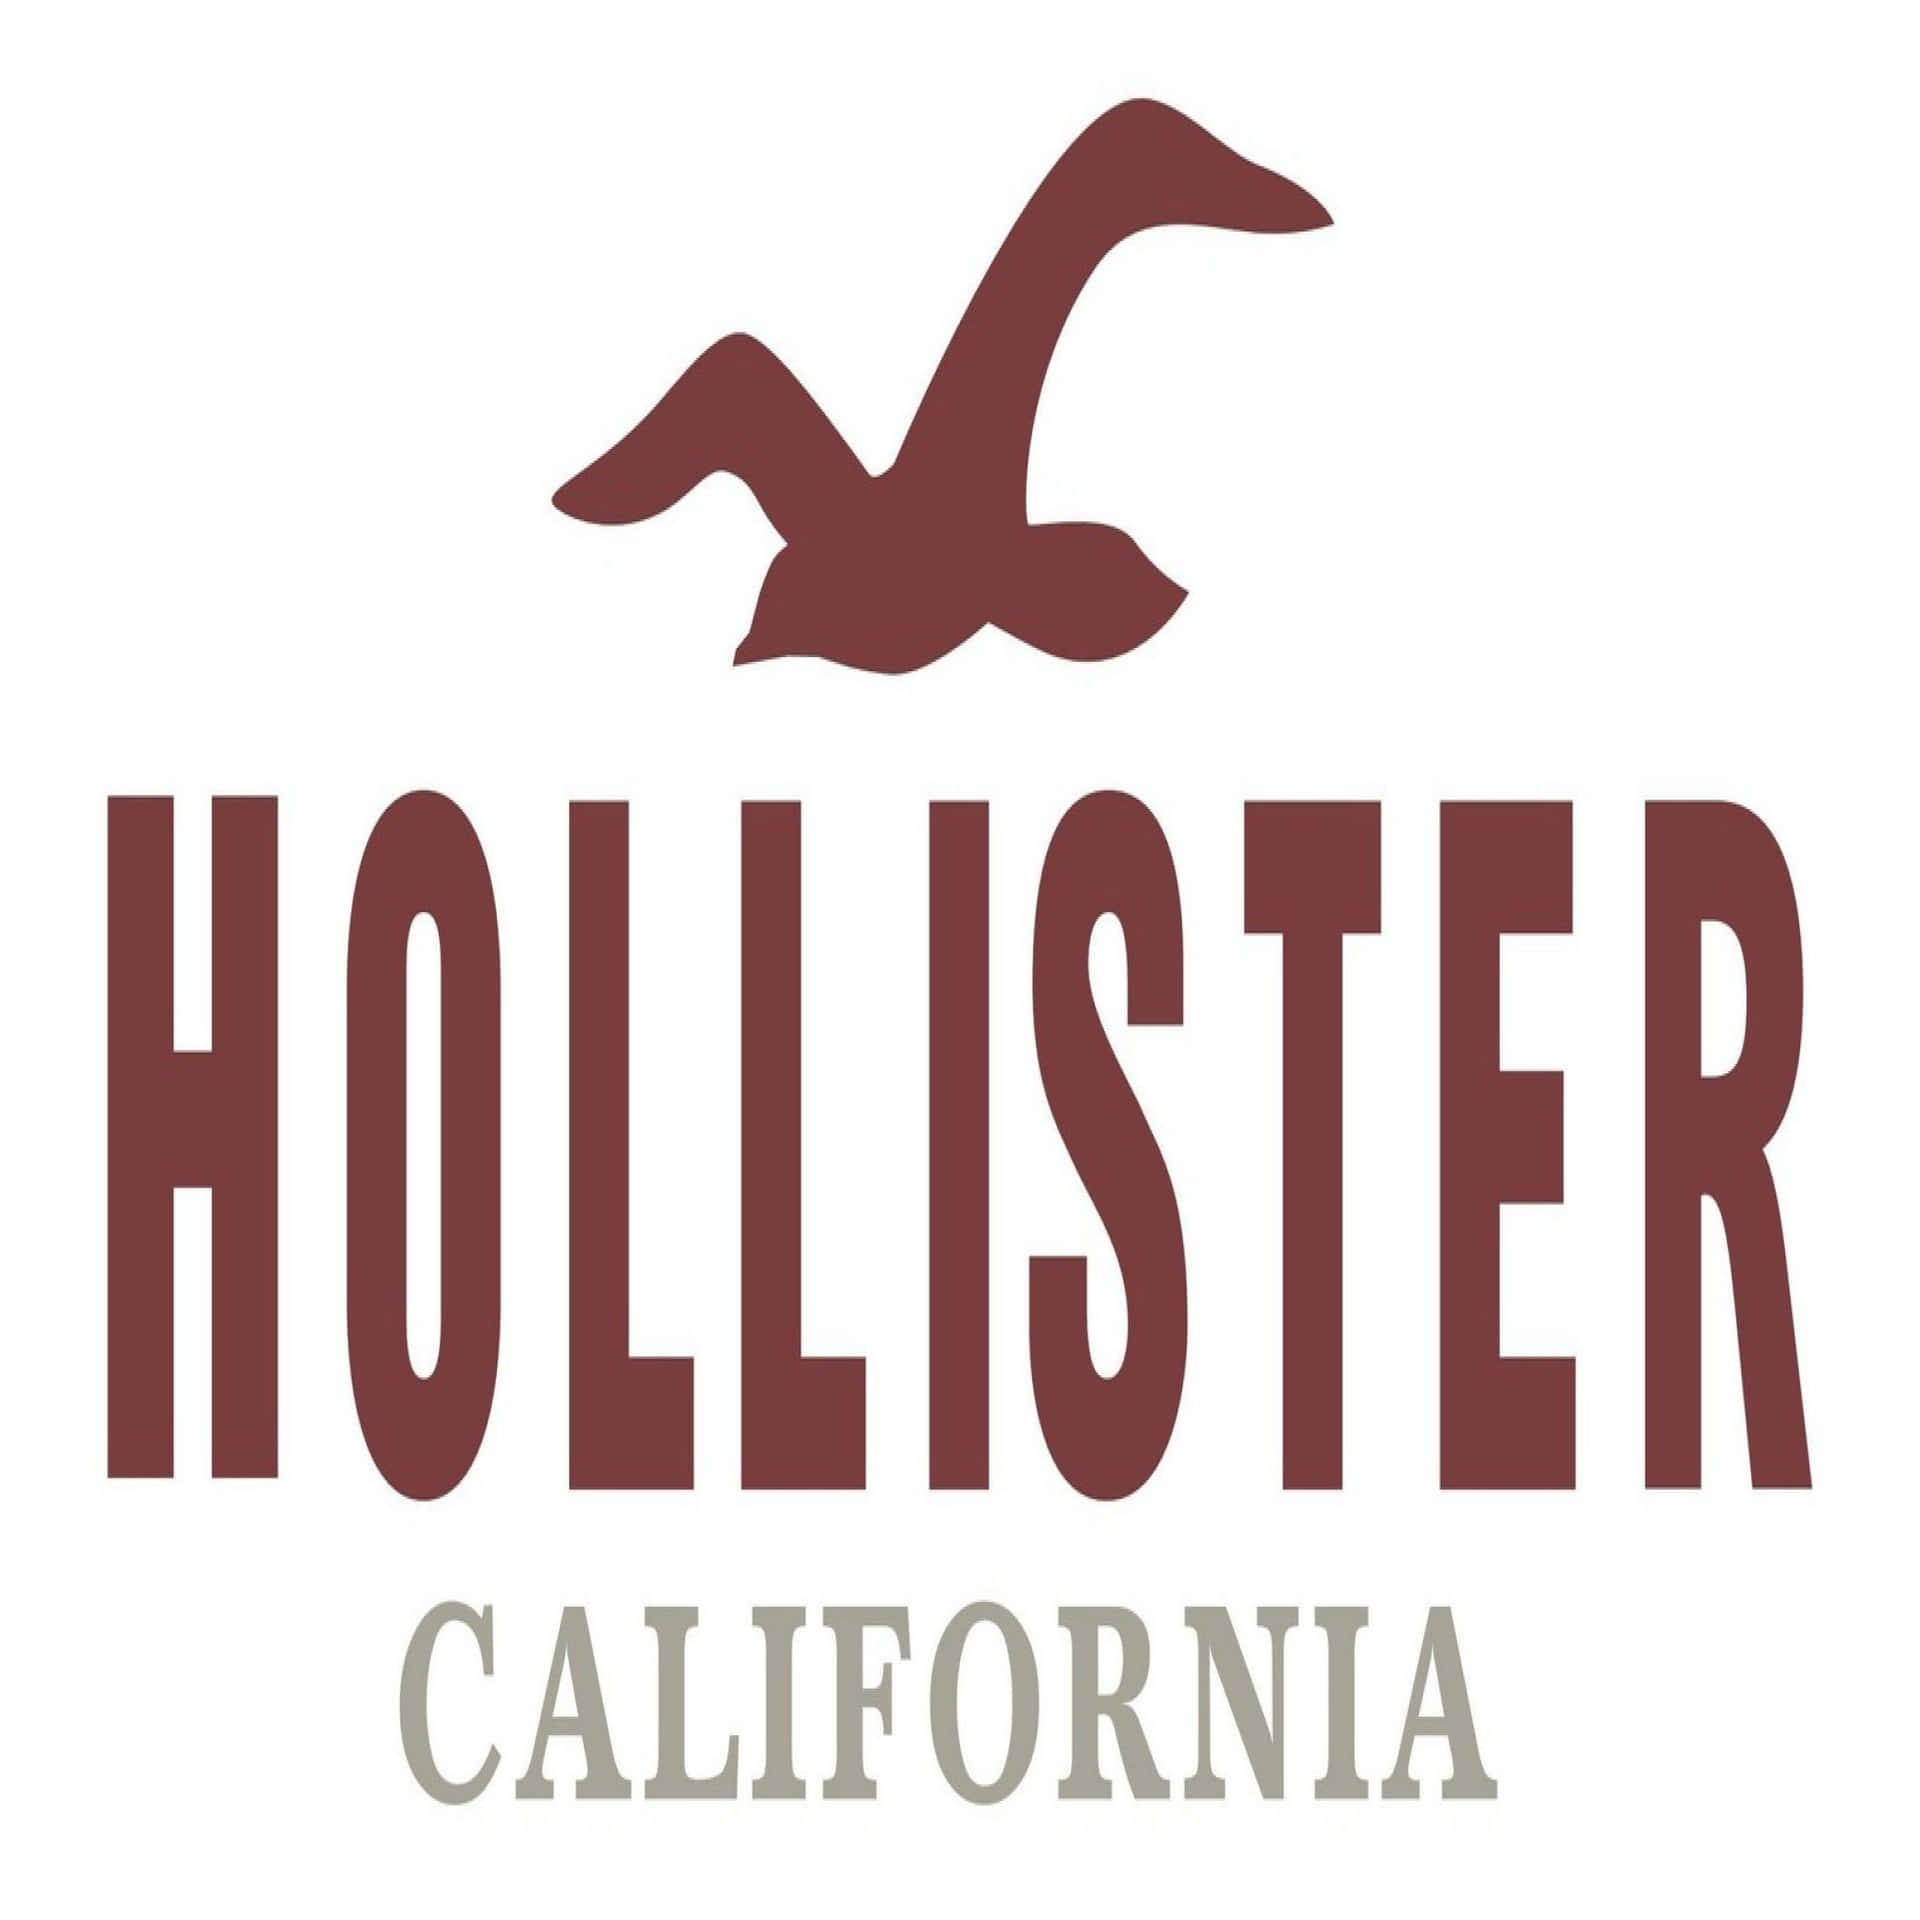 Live life with an ocean view from Hollister